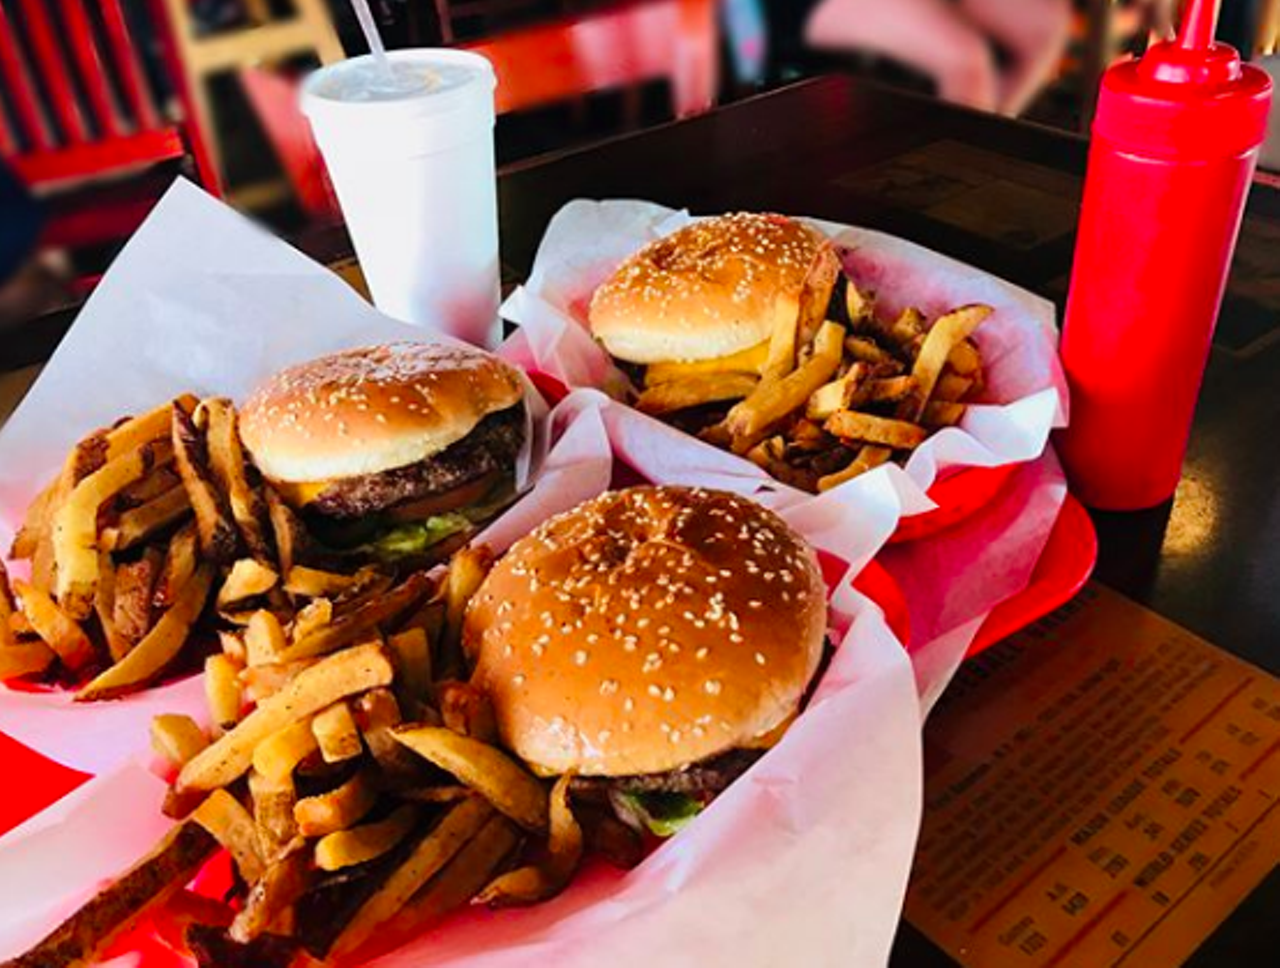 Babe’s Old Fashioned Food
Multiple locations, babeshamburgers.com
Kids under 9 can eat for free any time, any day of the week! Parents just have to purchase an adult entree and a beverage of their choice to claim the free grub.
Photo via Instagram / bite_me_texas_foodie